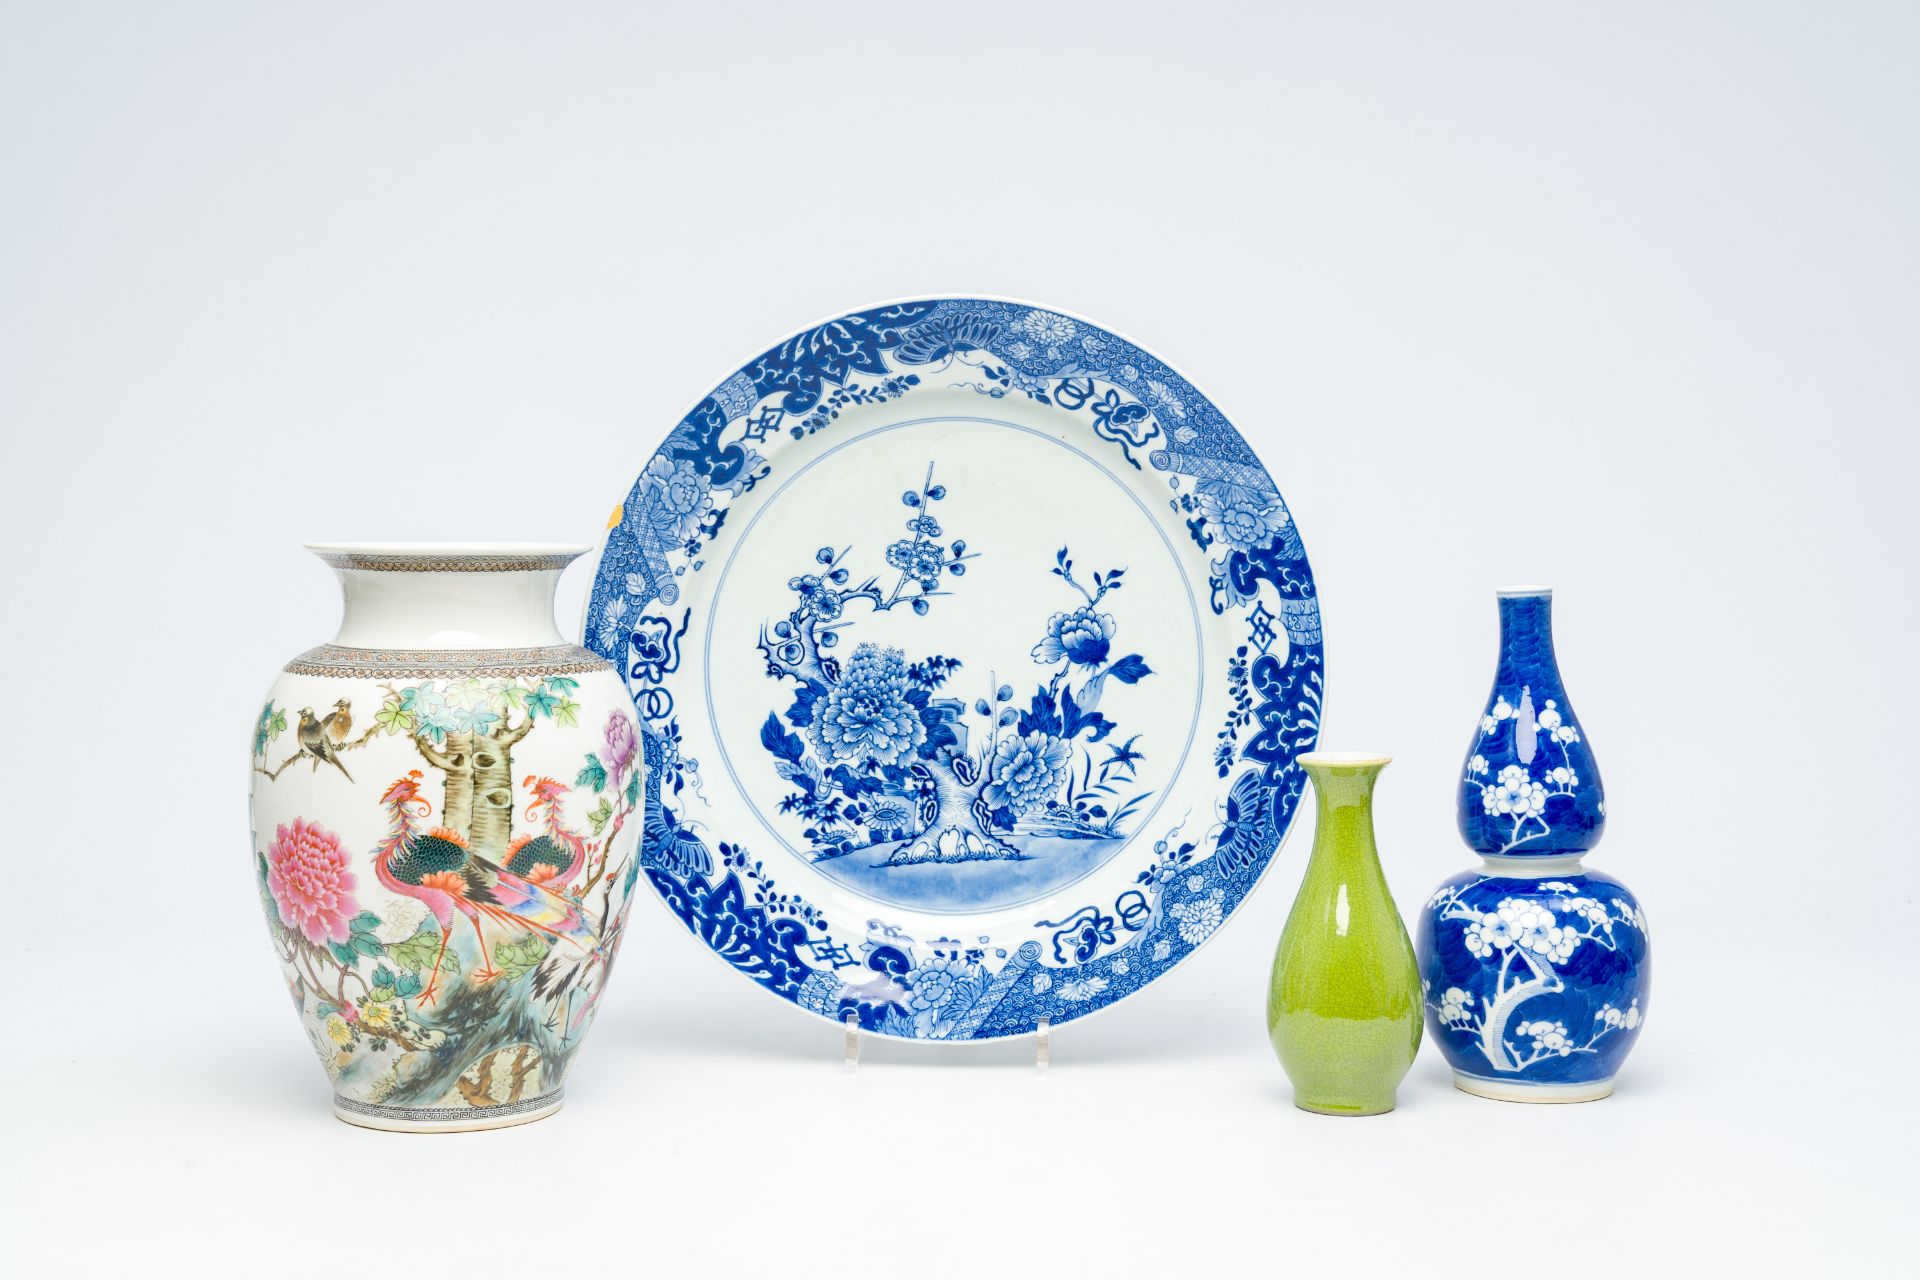 A varied collection of Chinese porcelain, Qianlong and later